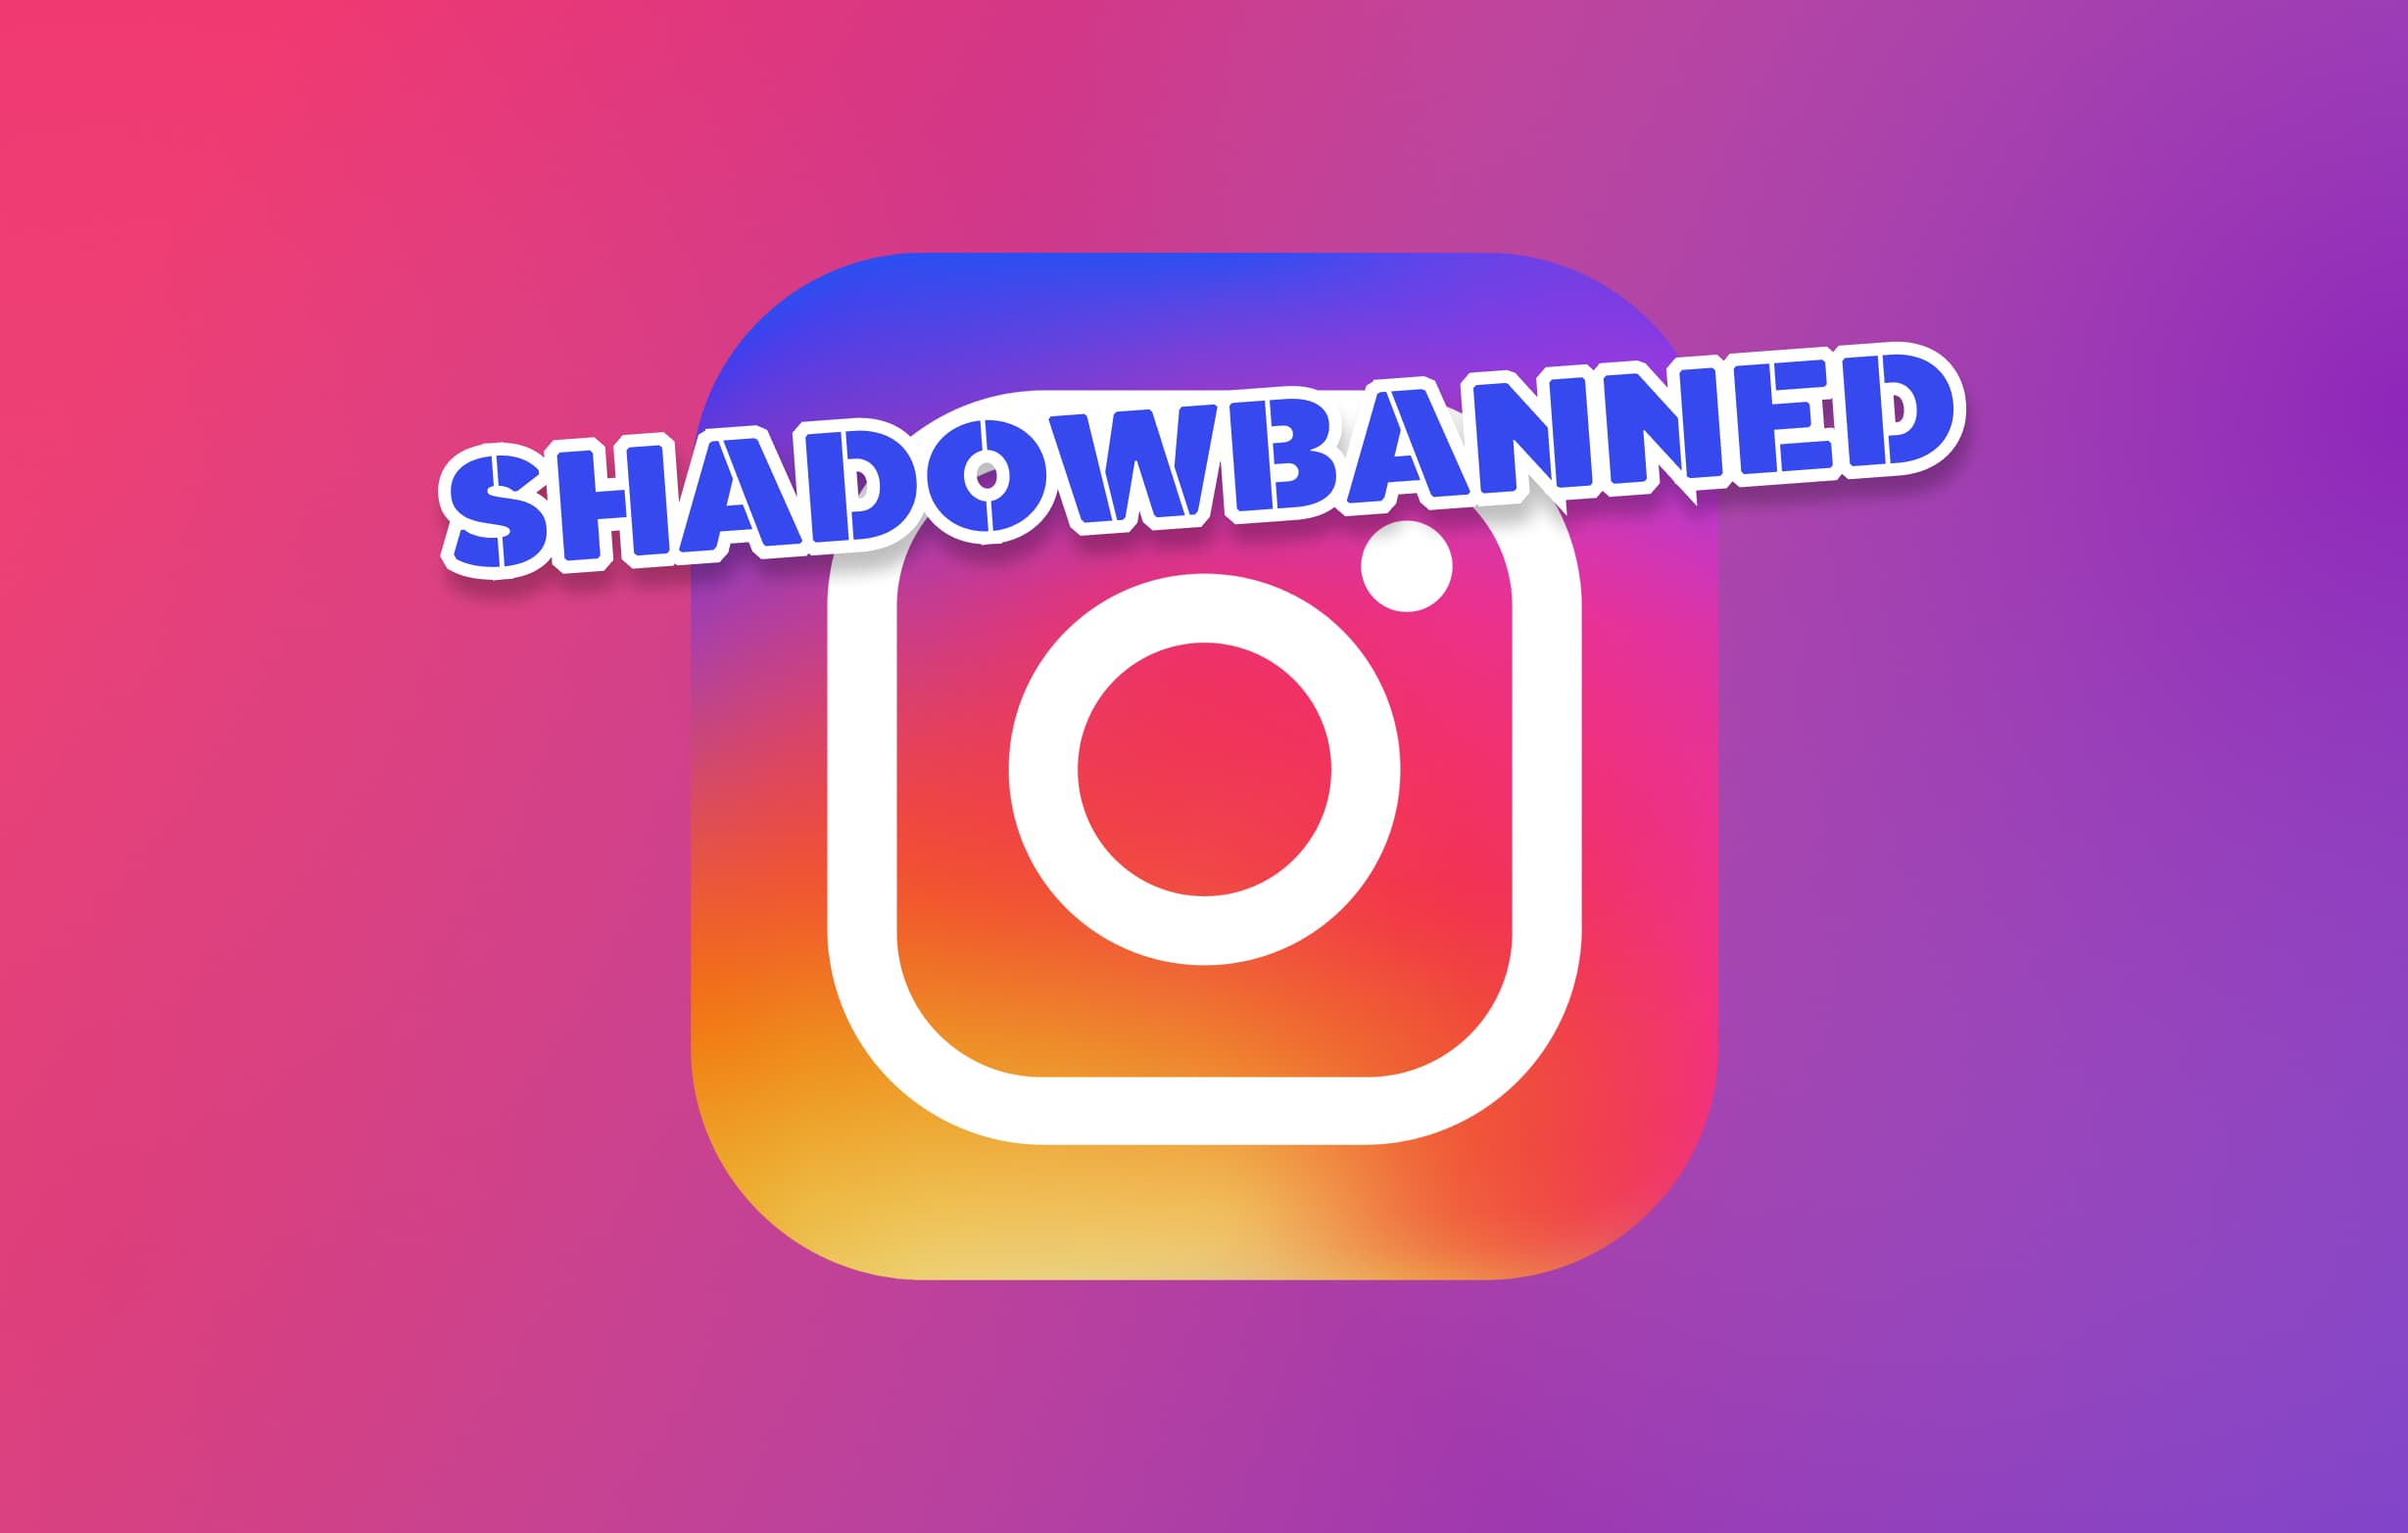 shadow banned